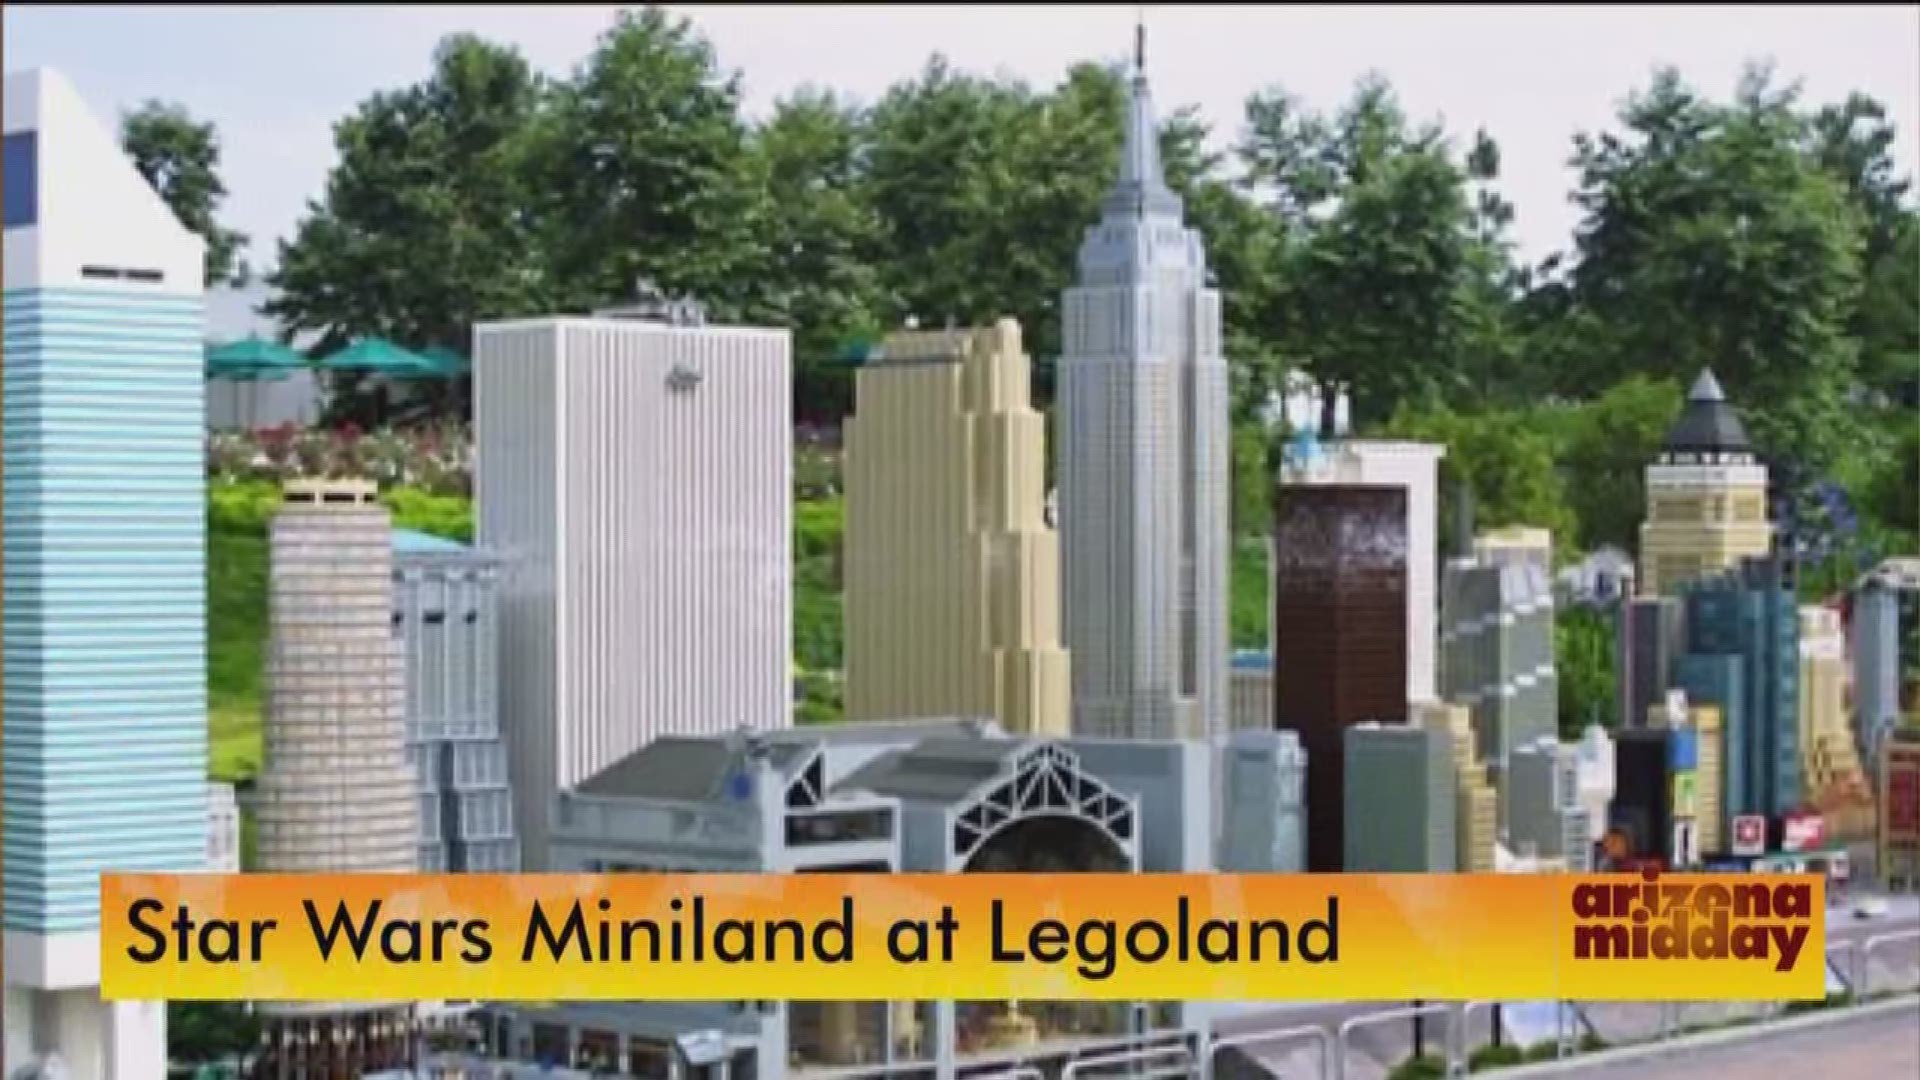 The force is strong at Legoland with the all new Star Wars Miniland exhibit. We share a preview of what you can see.